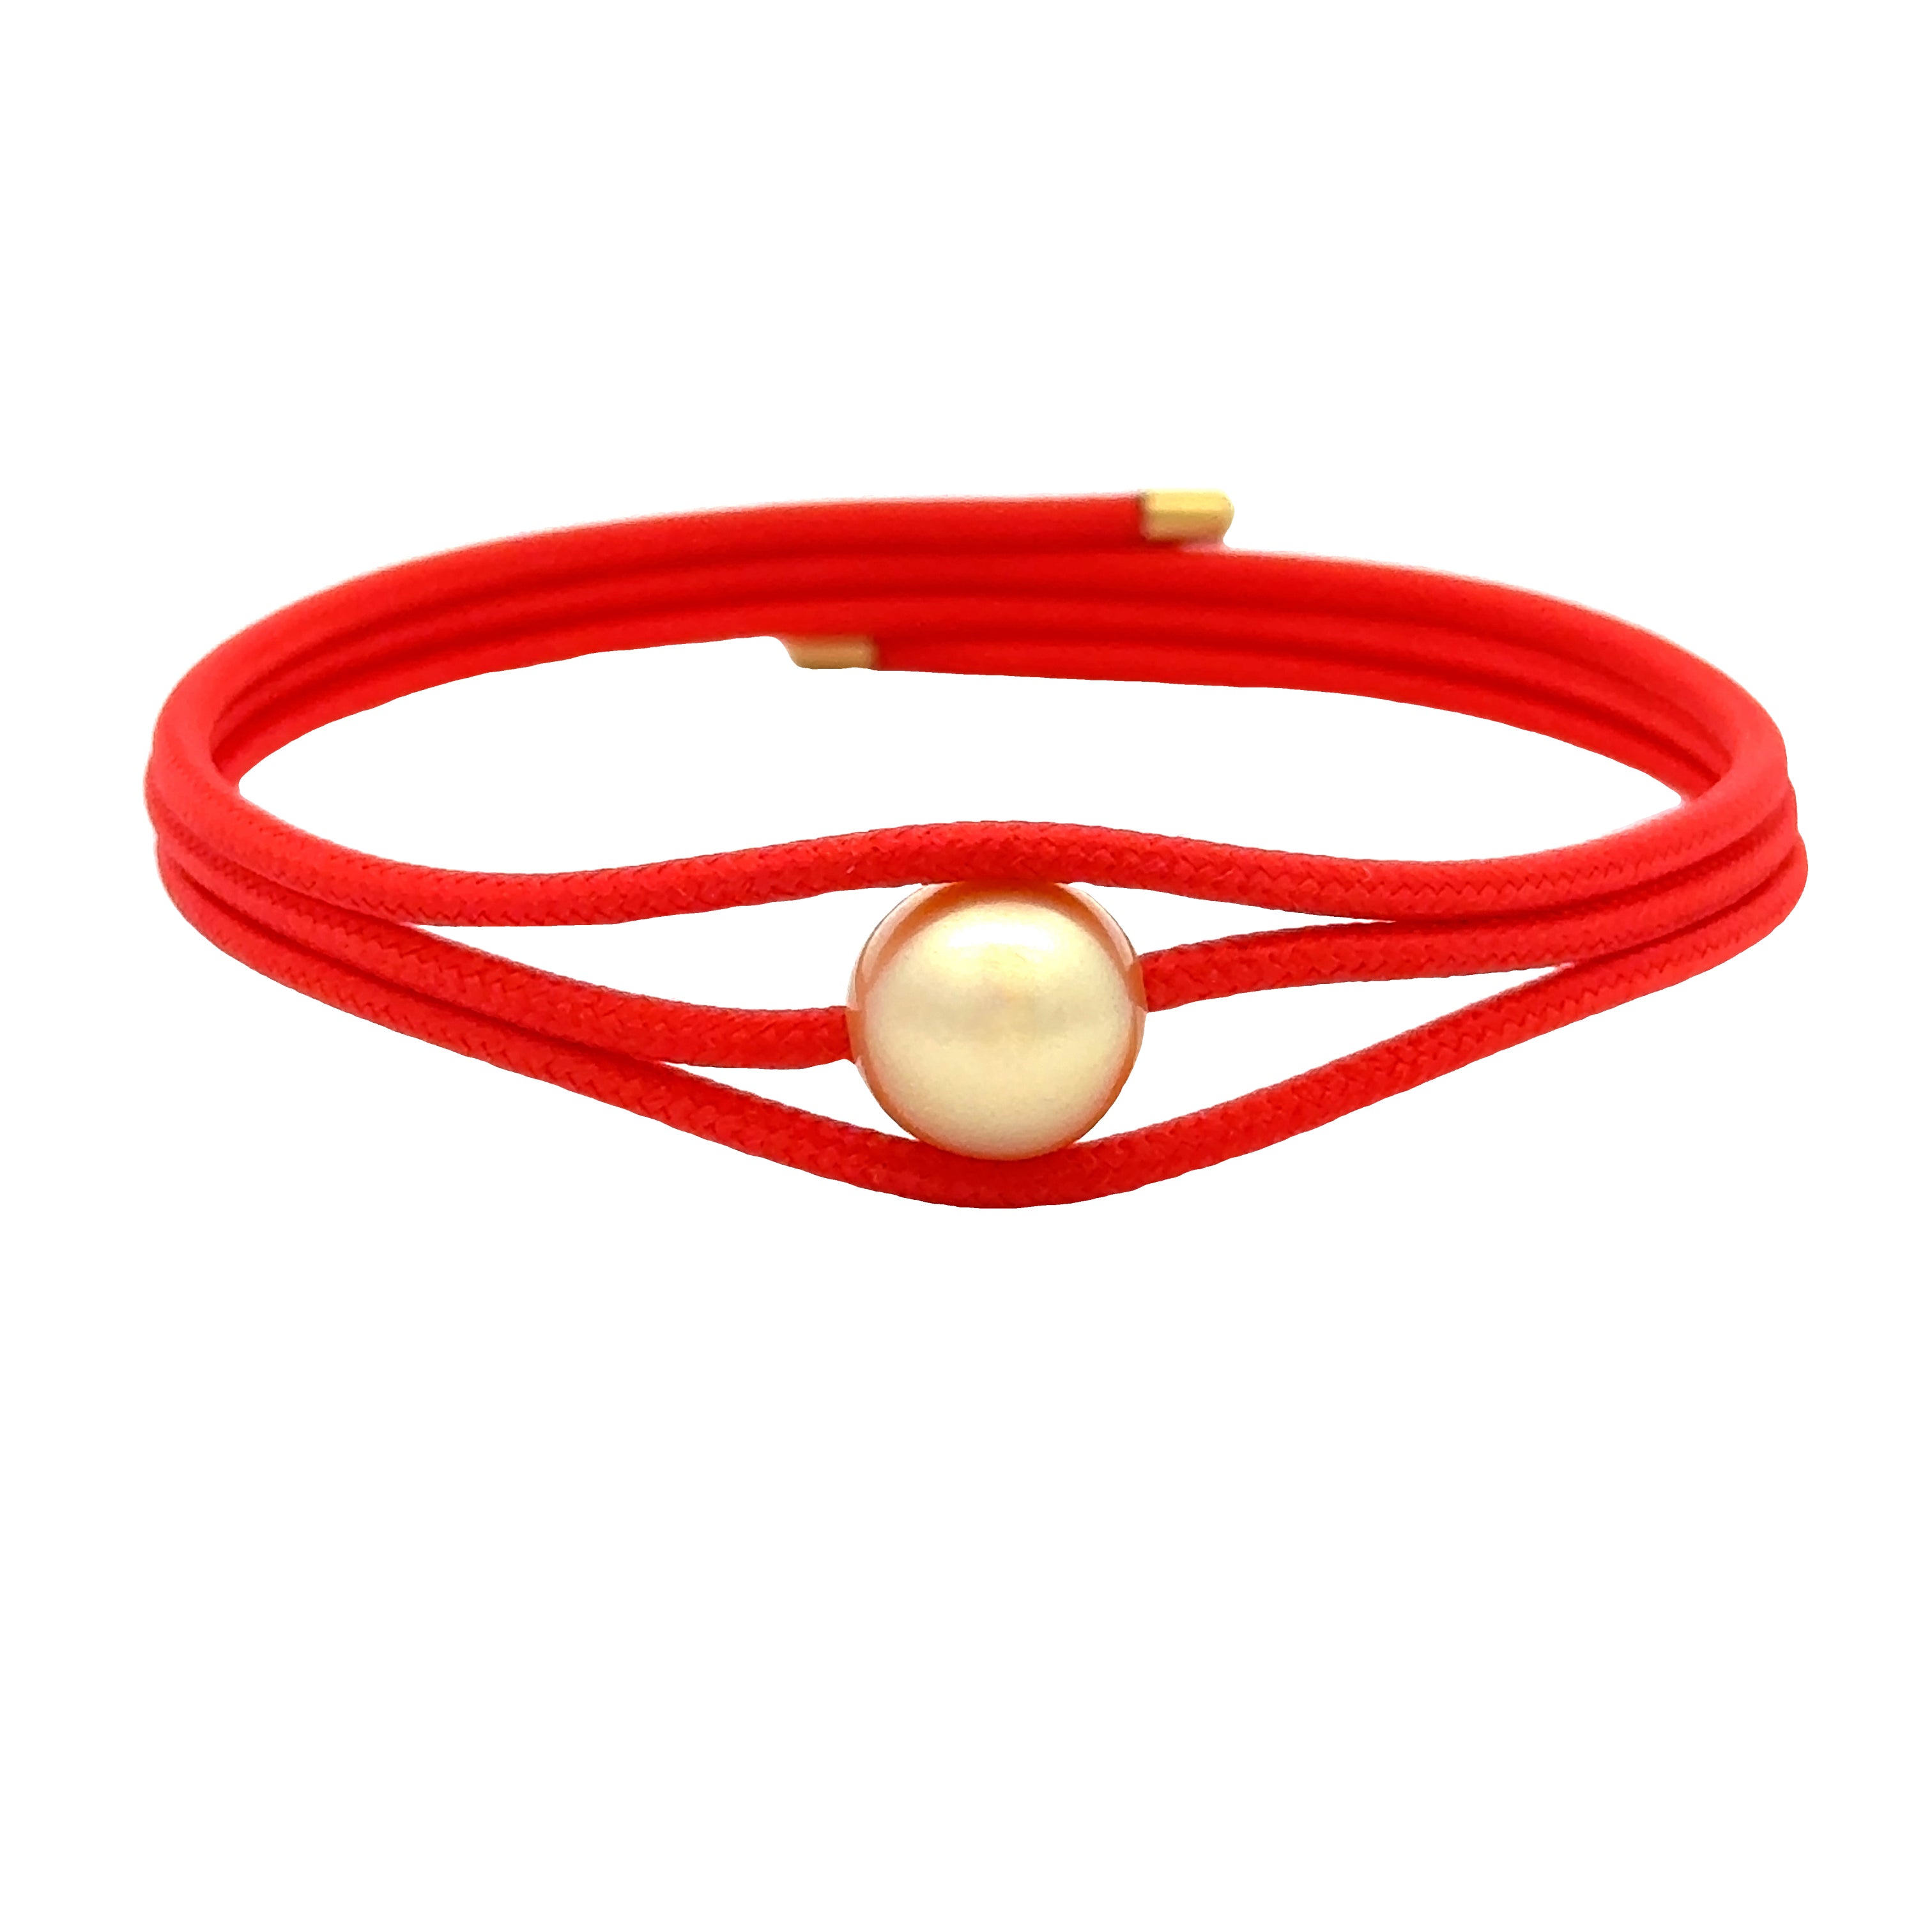 Stainless Steel South Sea Cultured Pearl Magnetic Wrap Bracelet Red With Gold Ends